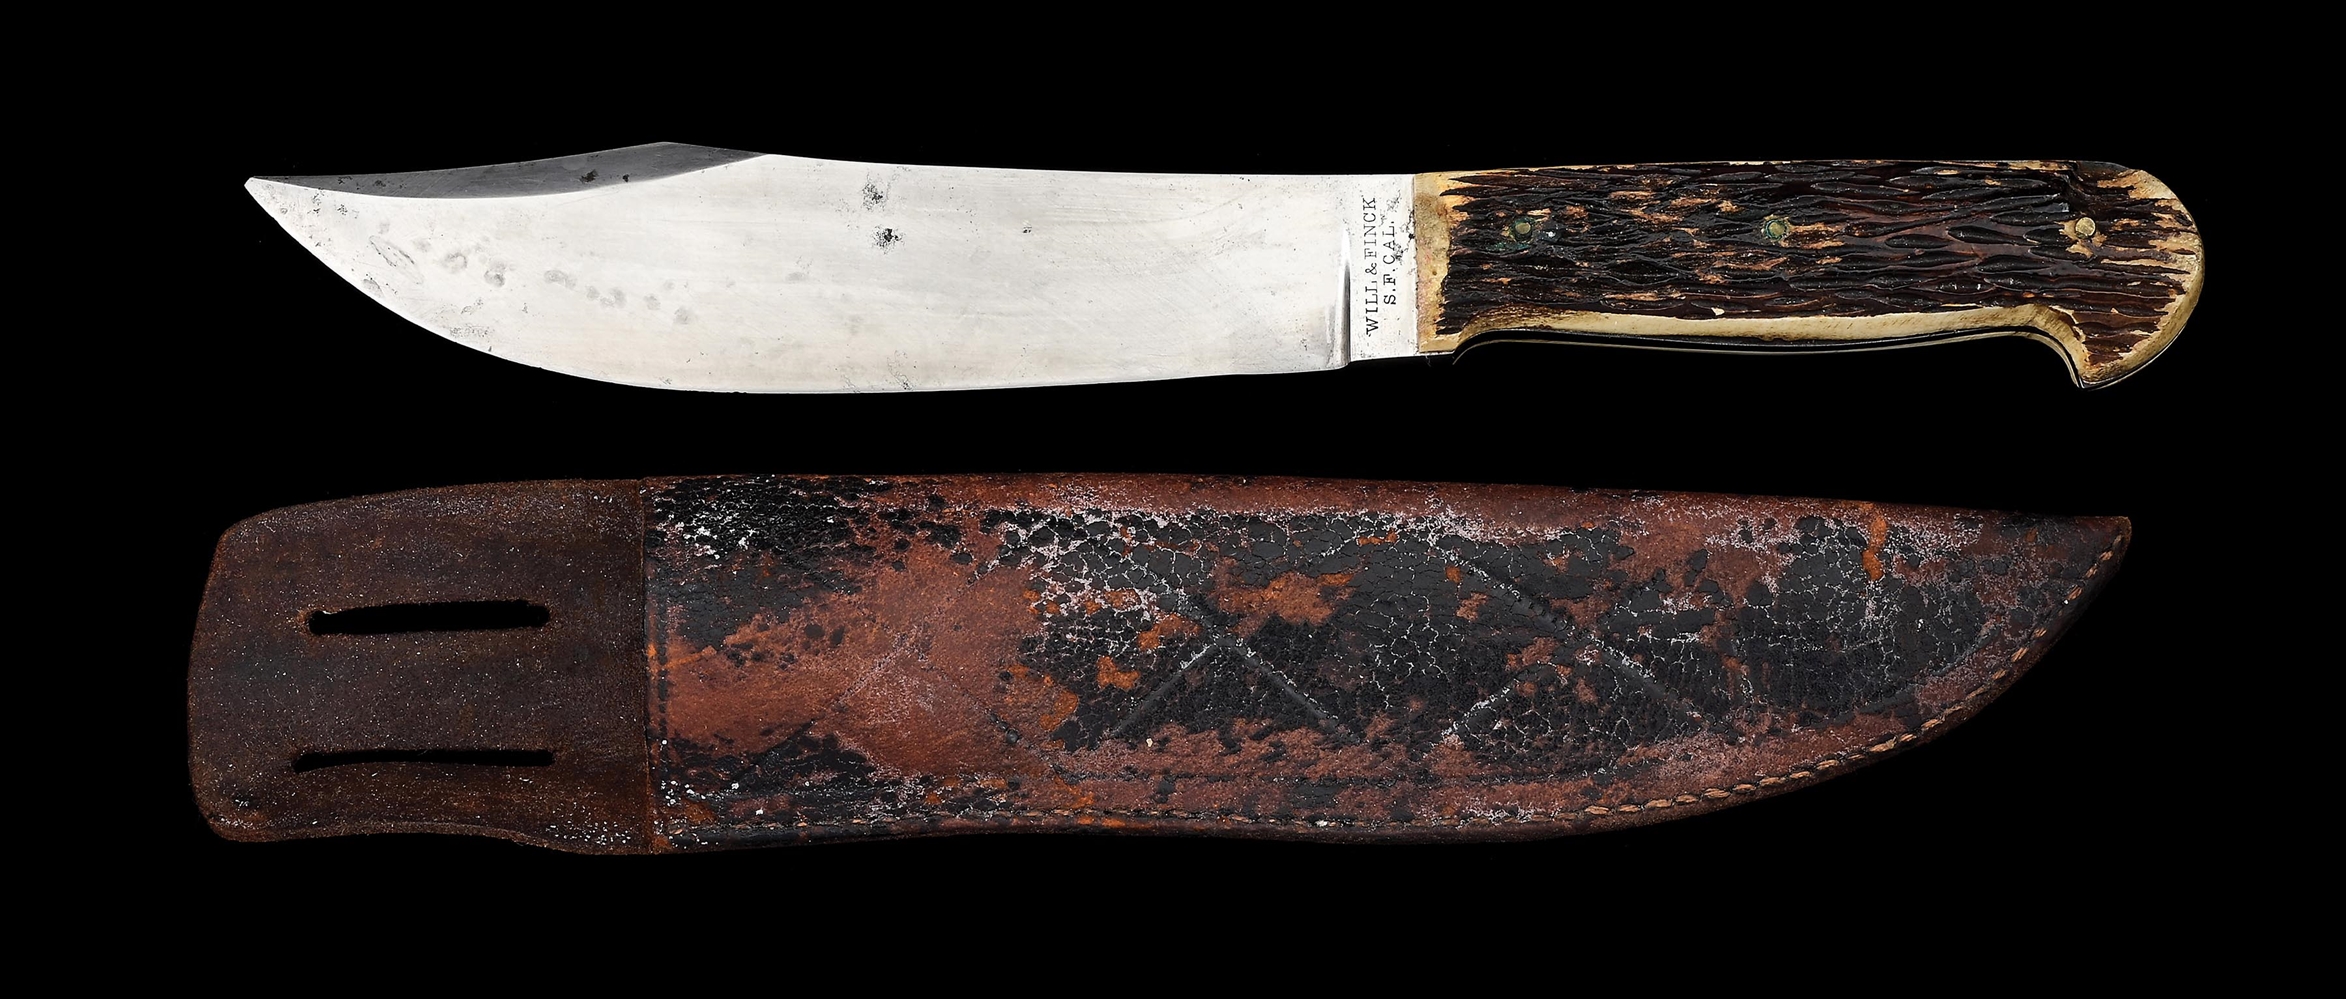 WILL & FINCK SAN FRANCISCO BOWIE KNIFE IN LEATHER SCABBARD.